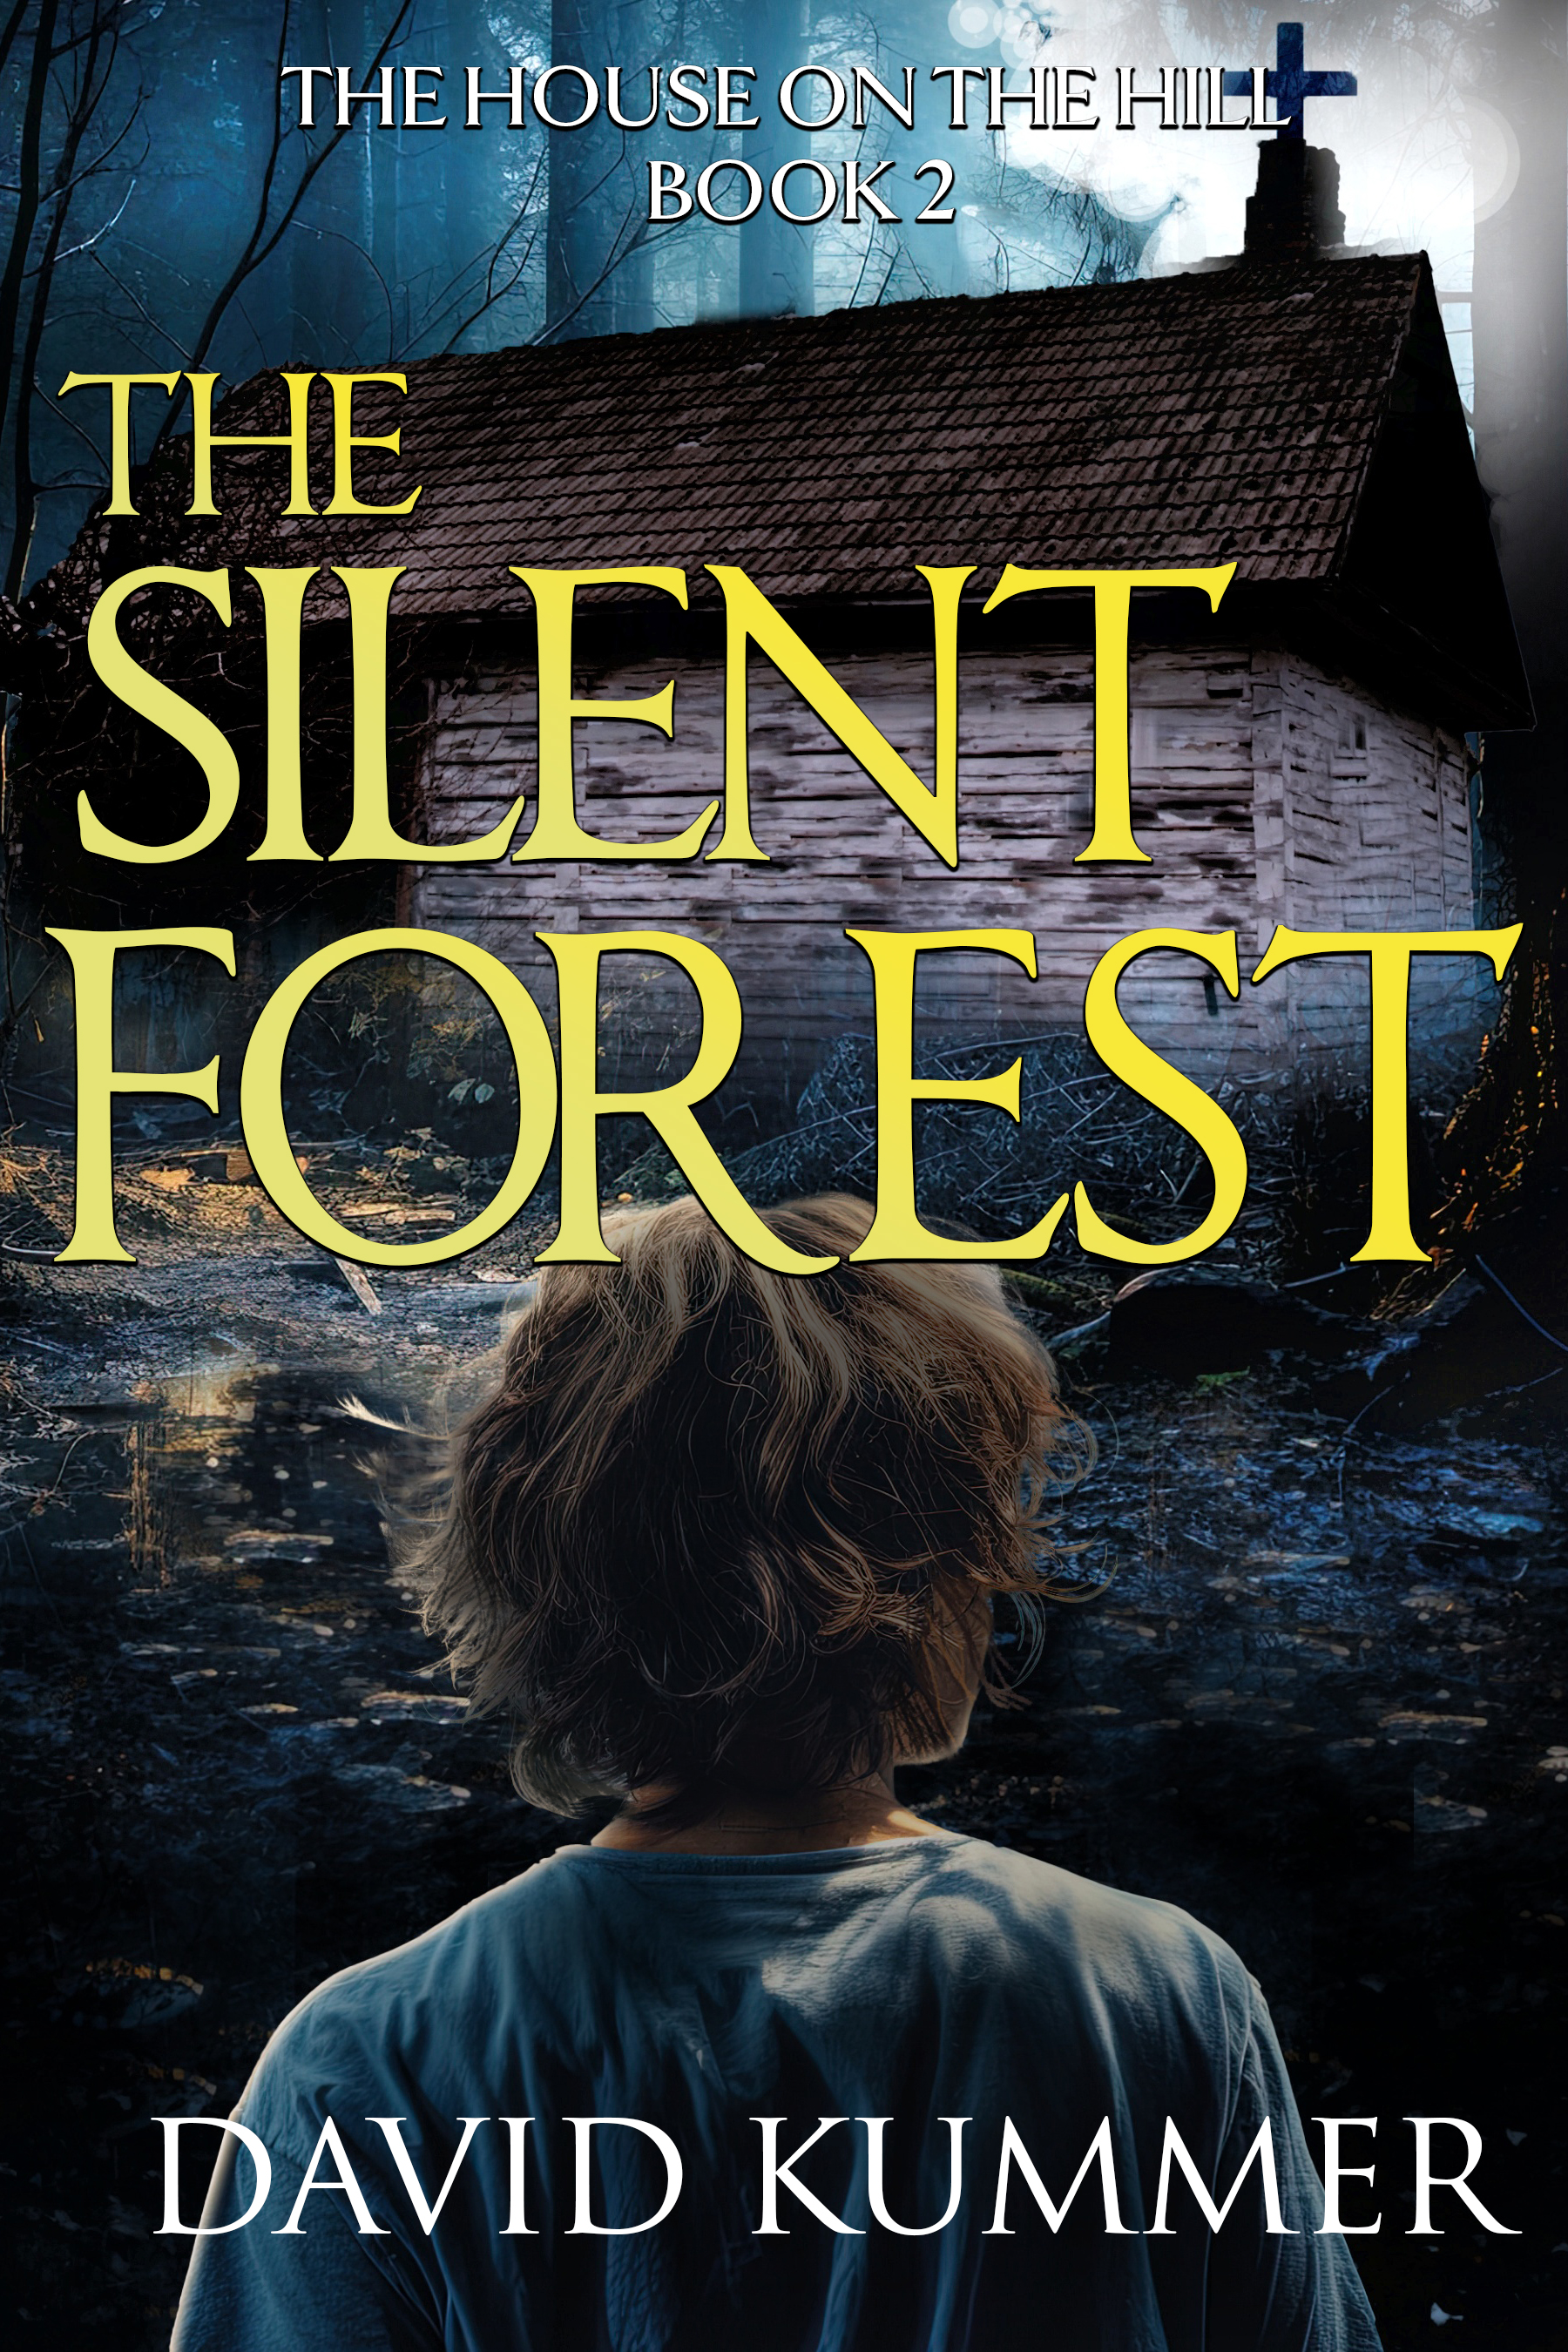 David Kummer Unveils Next Psychological Thriller Book in the "House on the Hill" Series, "The Silent Forest"
